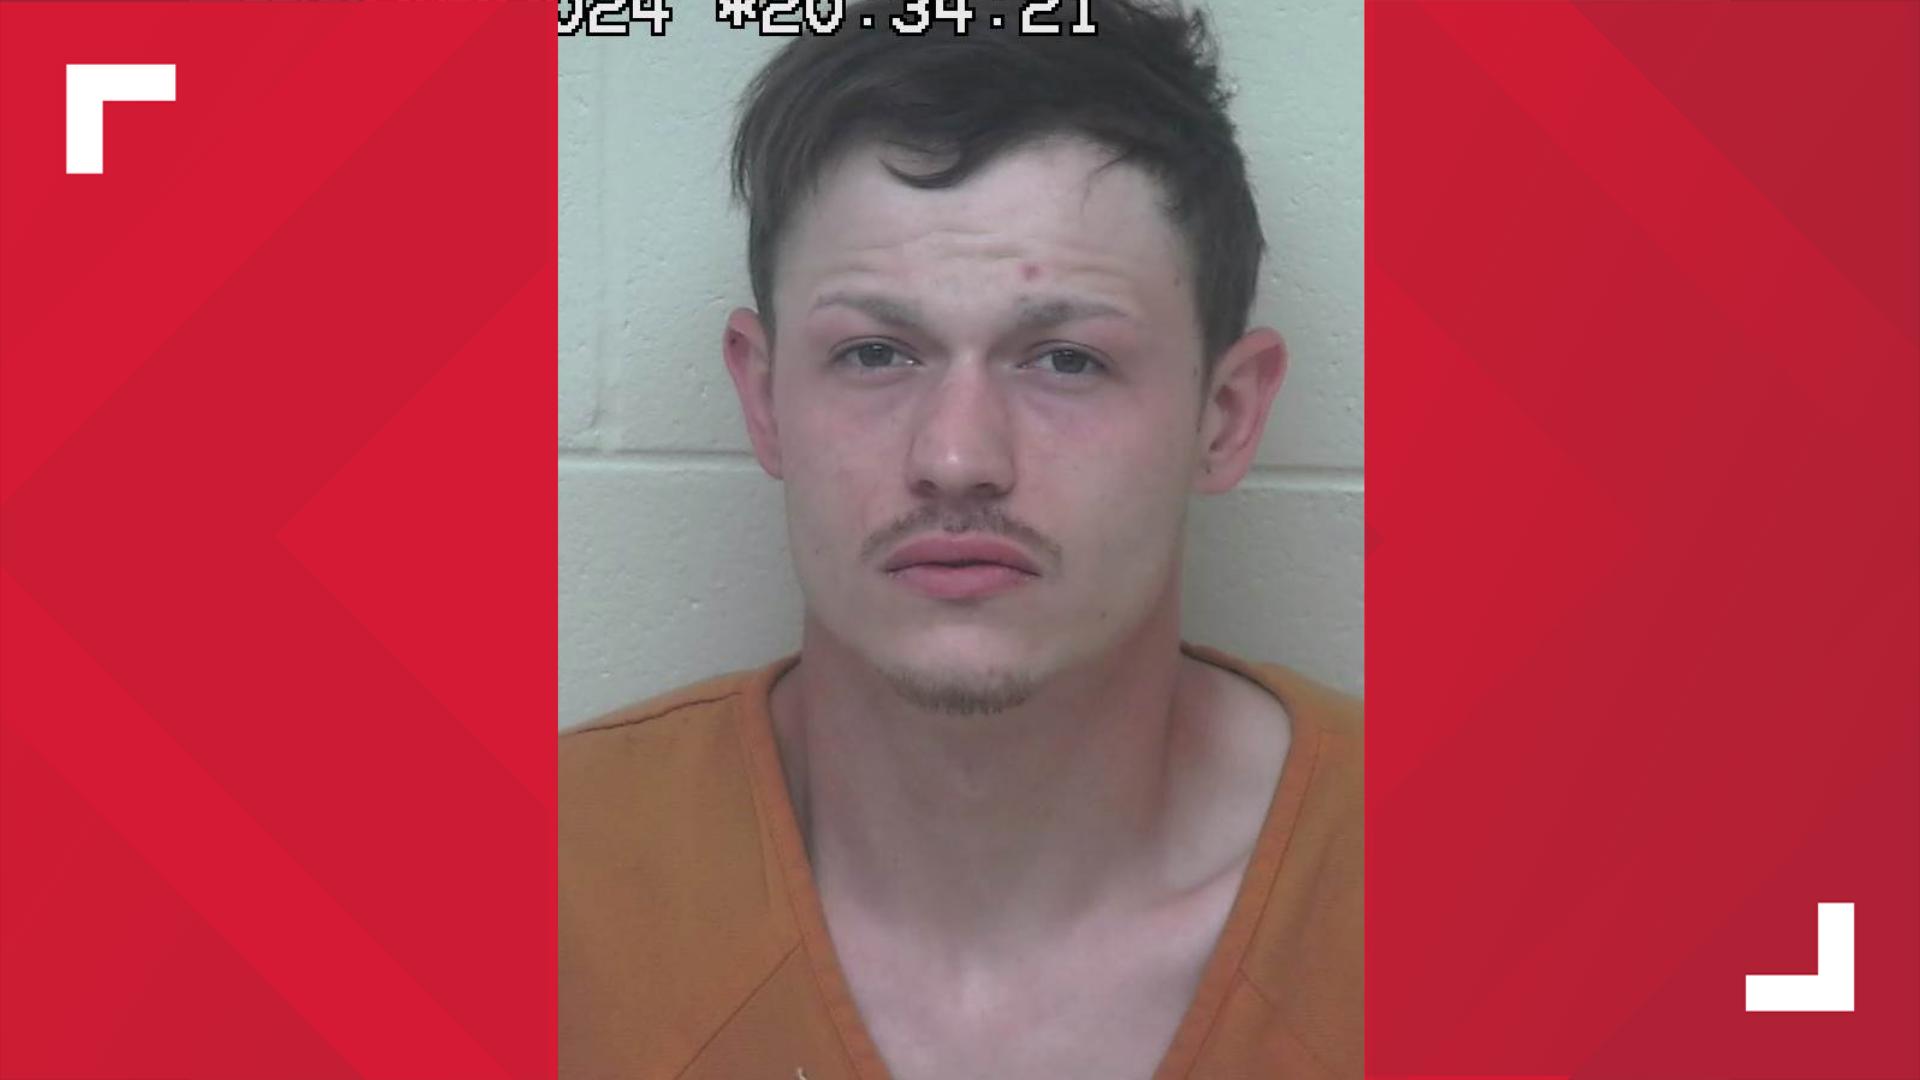 Gage Smith is charged with three counts of aggravated vehicular homicide and one count of aggravated vehicular assault.